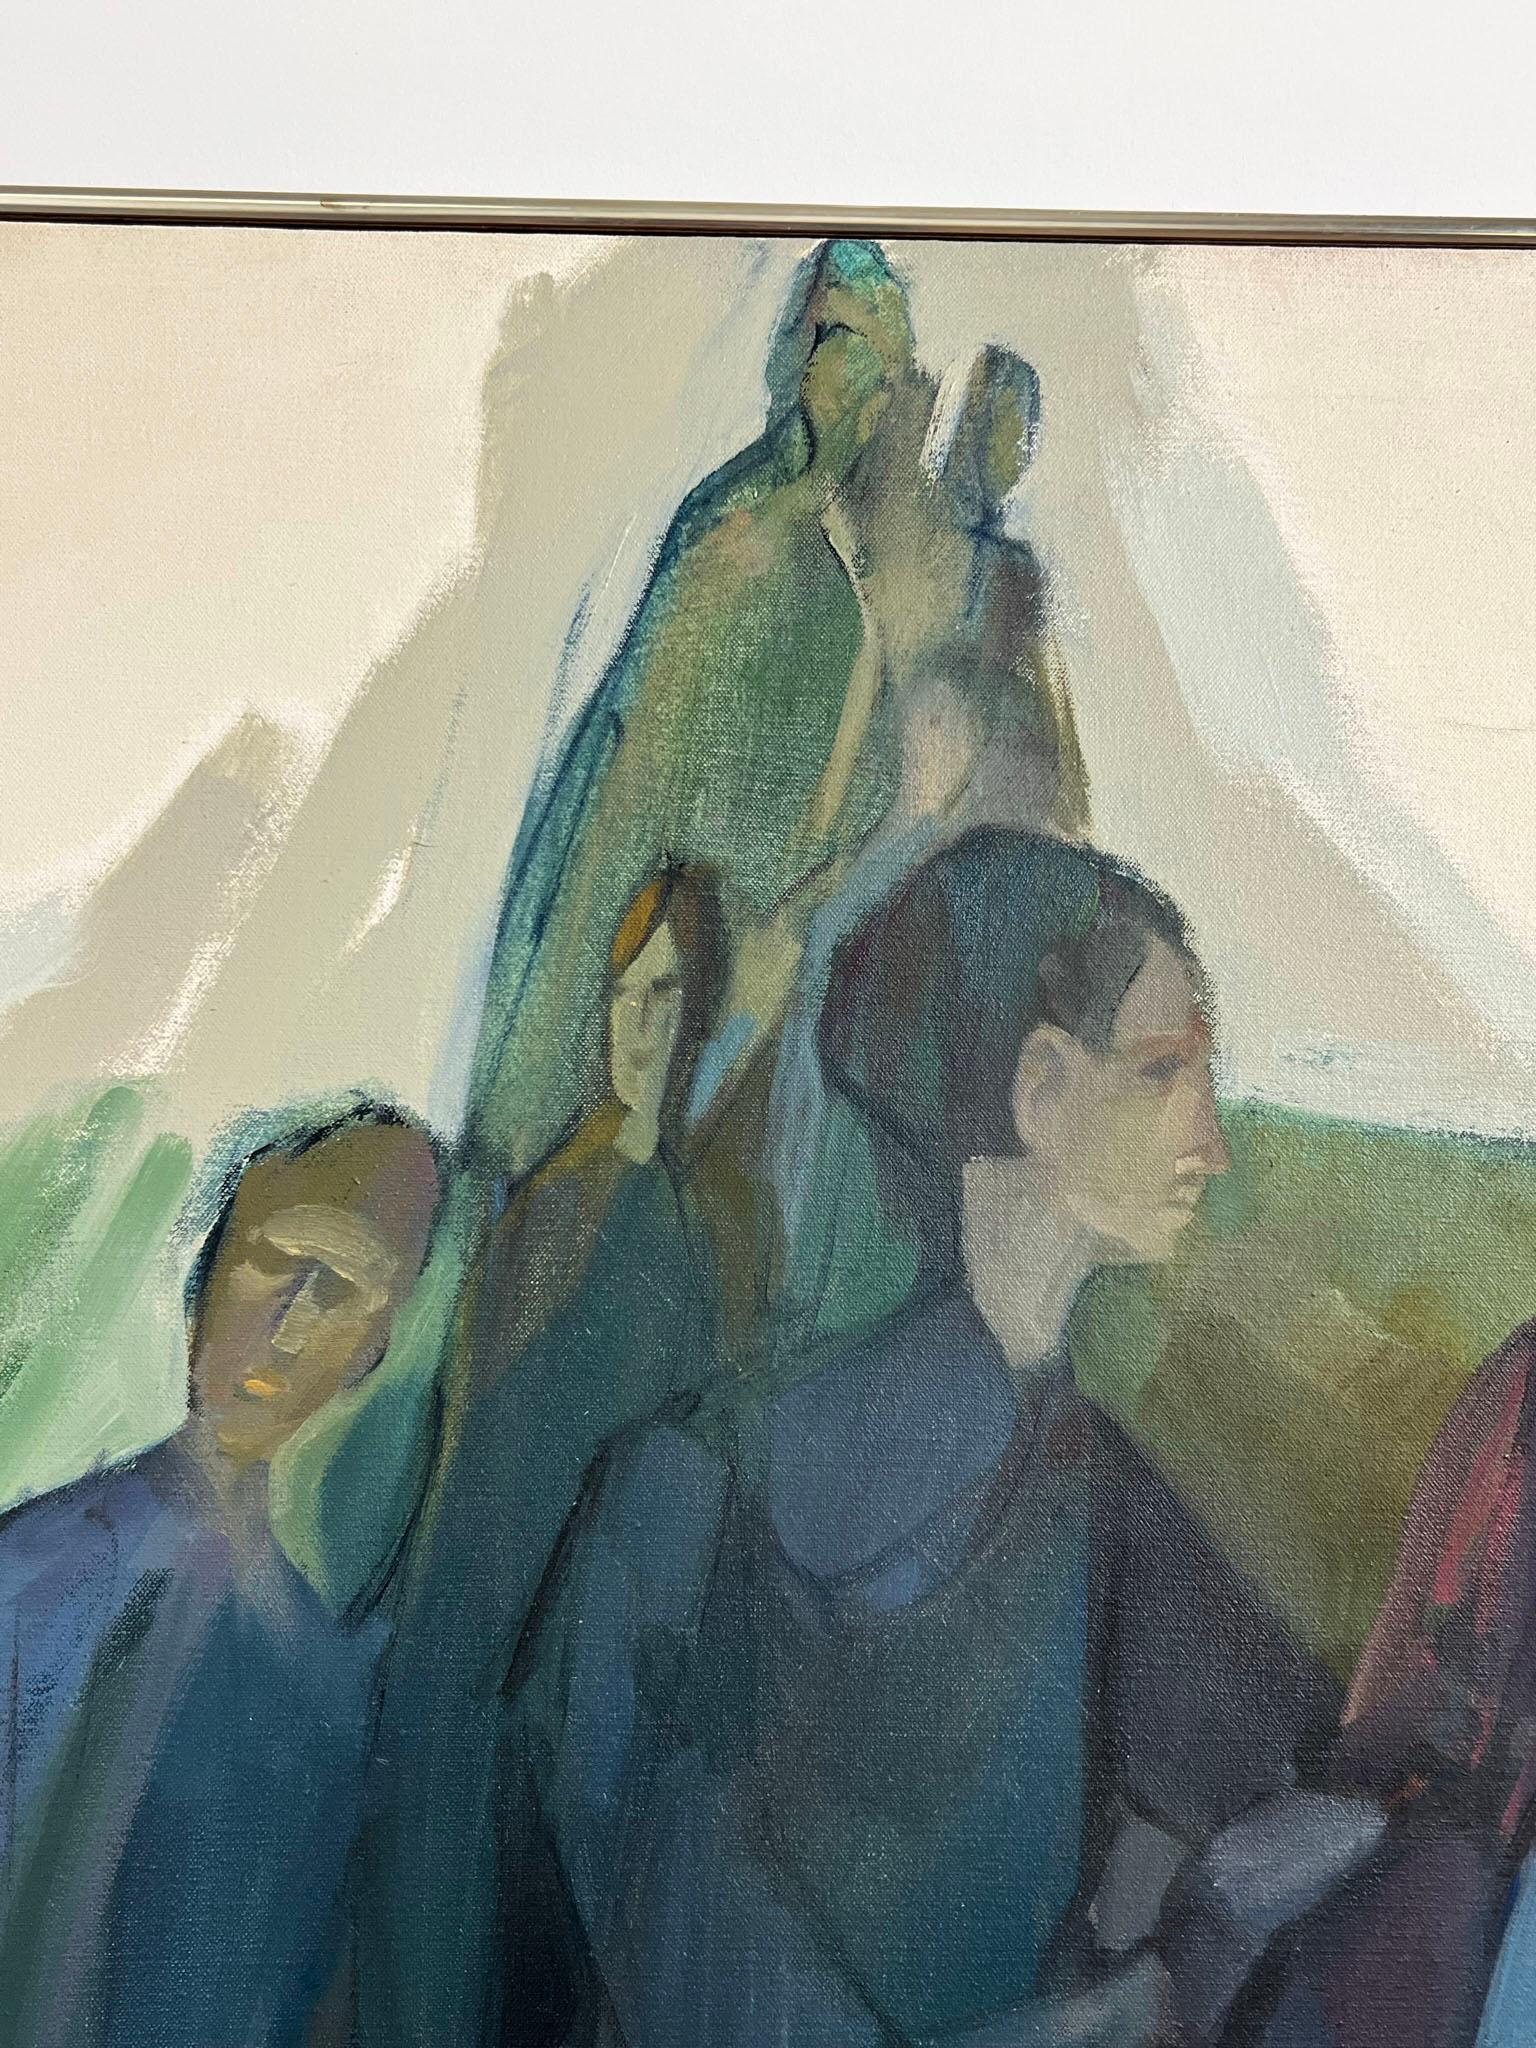 Mid-century modernist painting circa 1960s by Betty Barnes Loehle (1923-2013), depicting a grouping of elongated young figures on a hillside. She and her husband Richard were both noted artists and members of the Georgia State Art Collection.